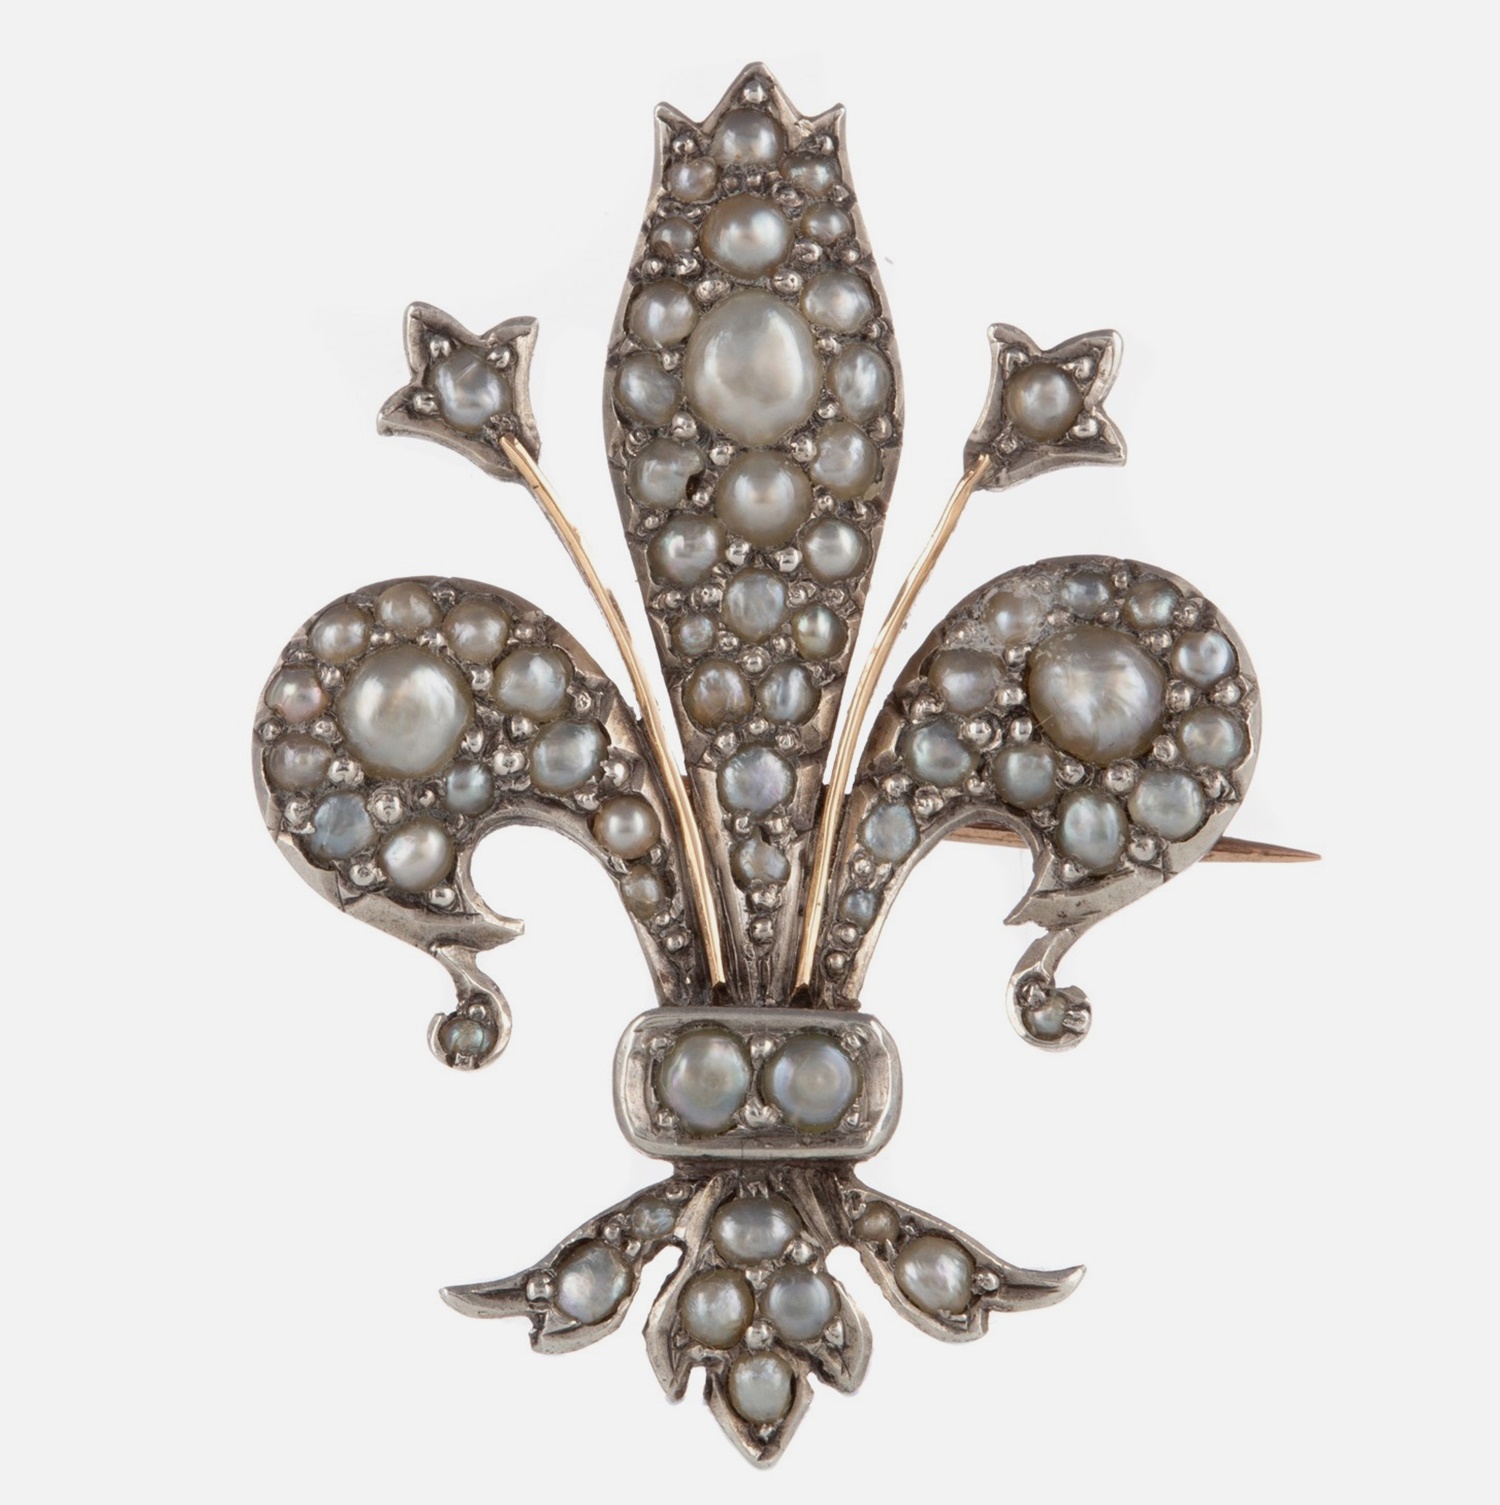 Forever in Fashion: 19th & 20th Century Jewellery